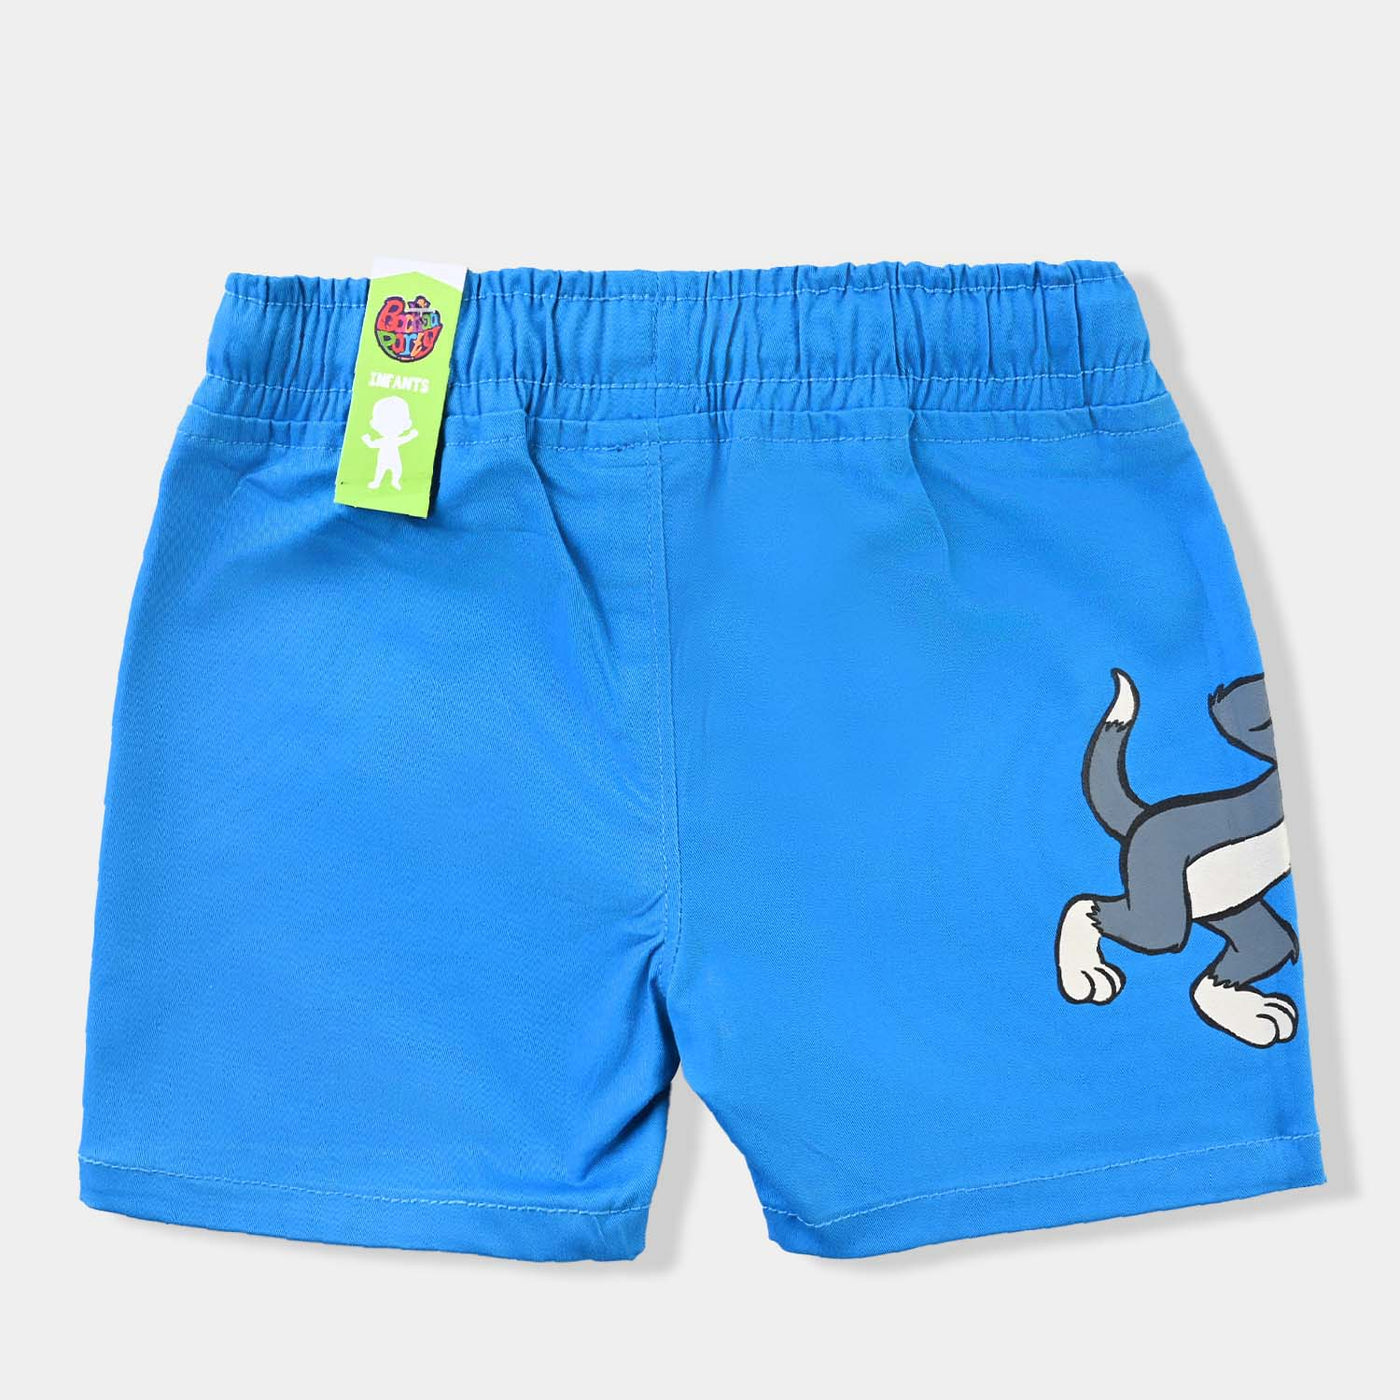 Infant Boys Cotton Twill Short Character-Blue